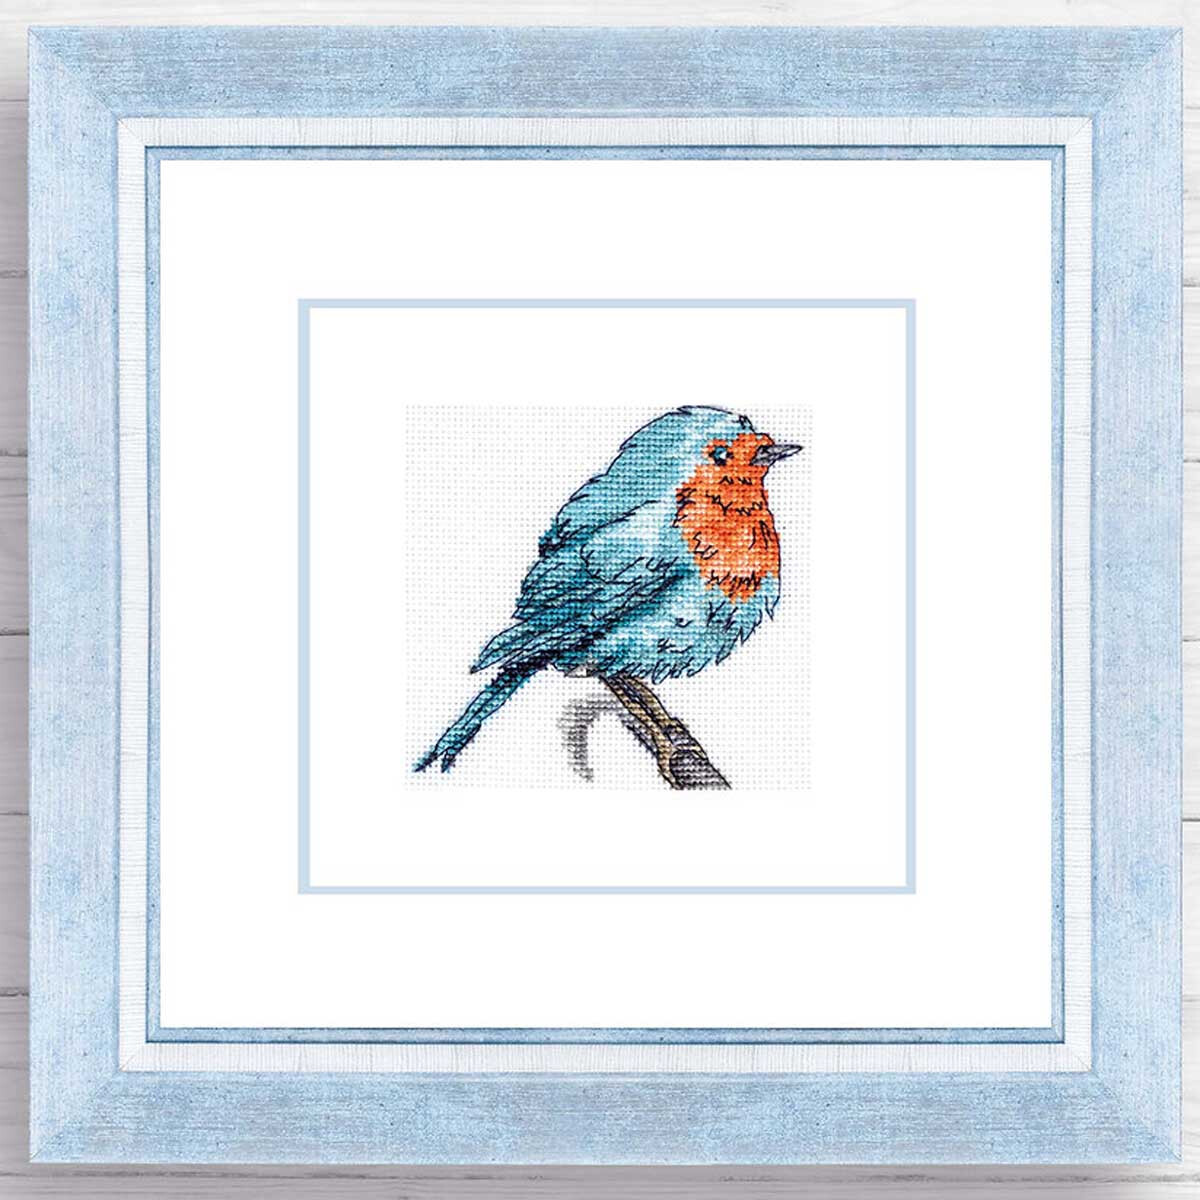 Luca-S counted cross stitch kit with frame...